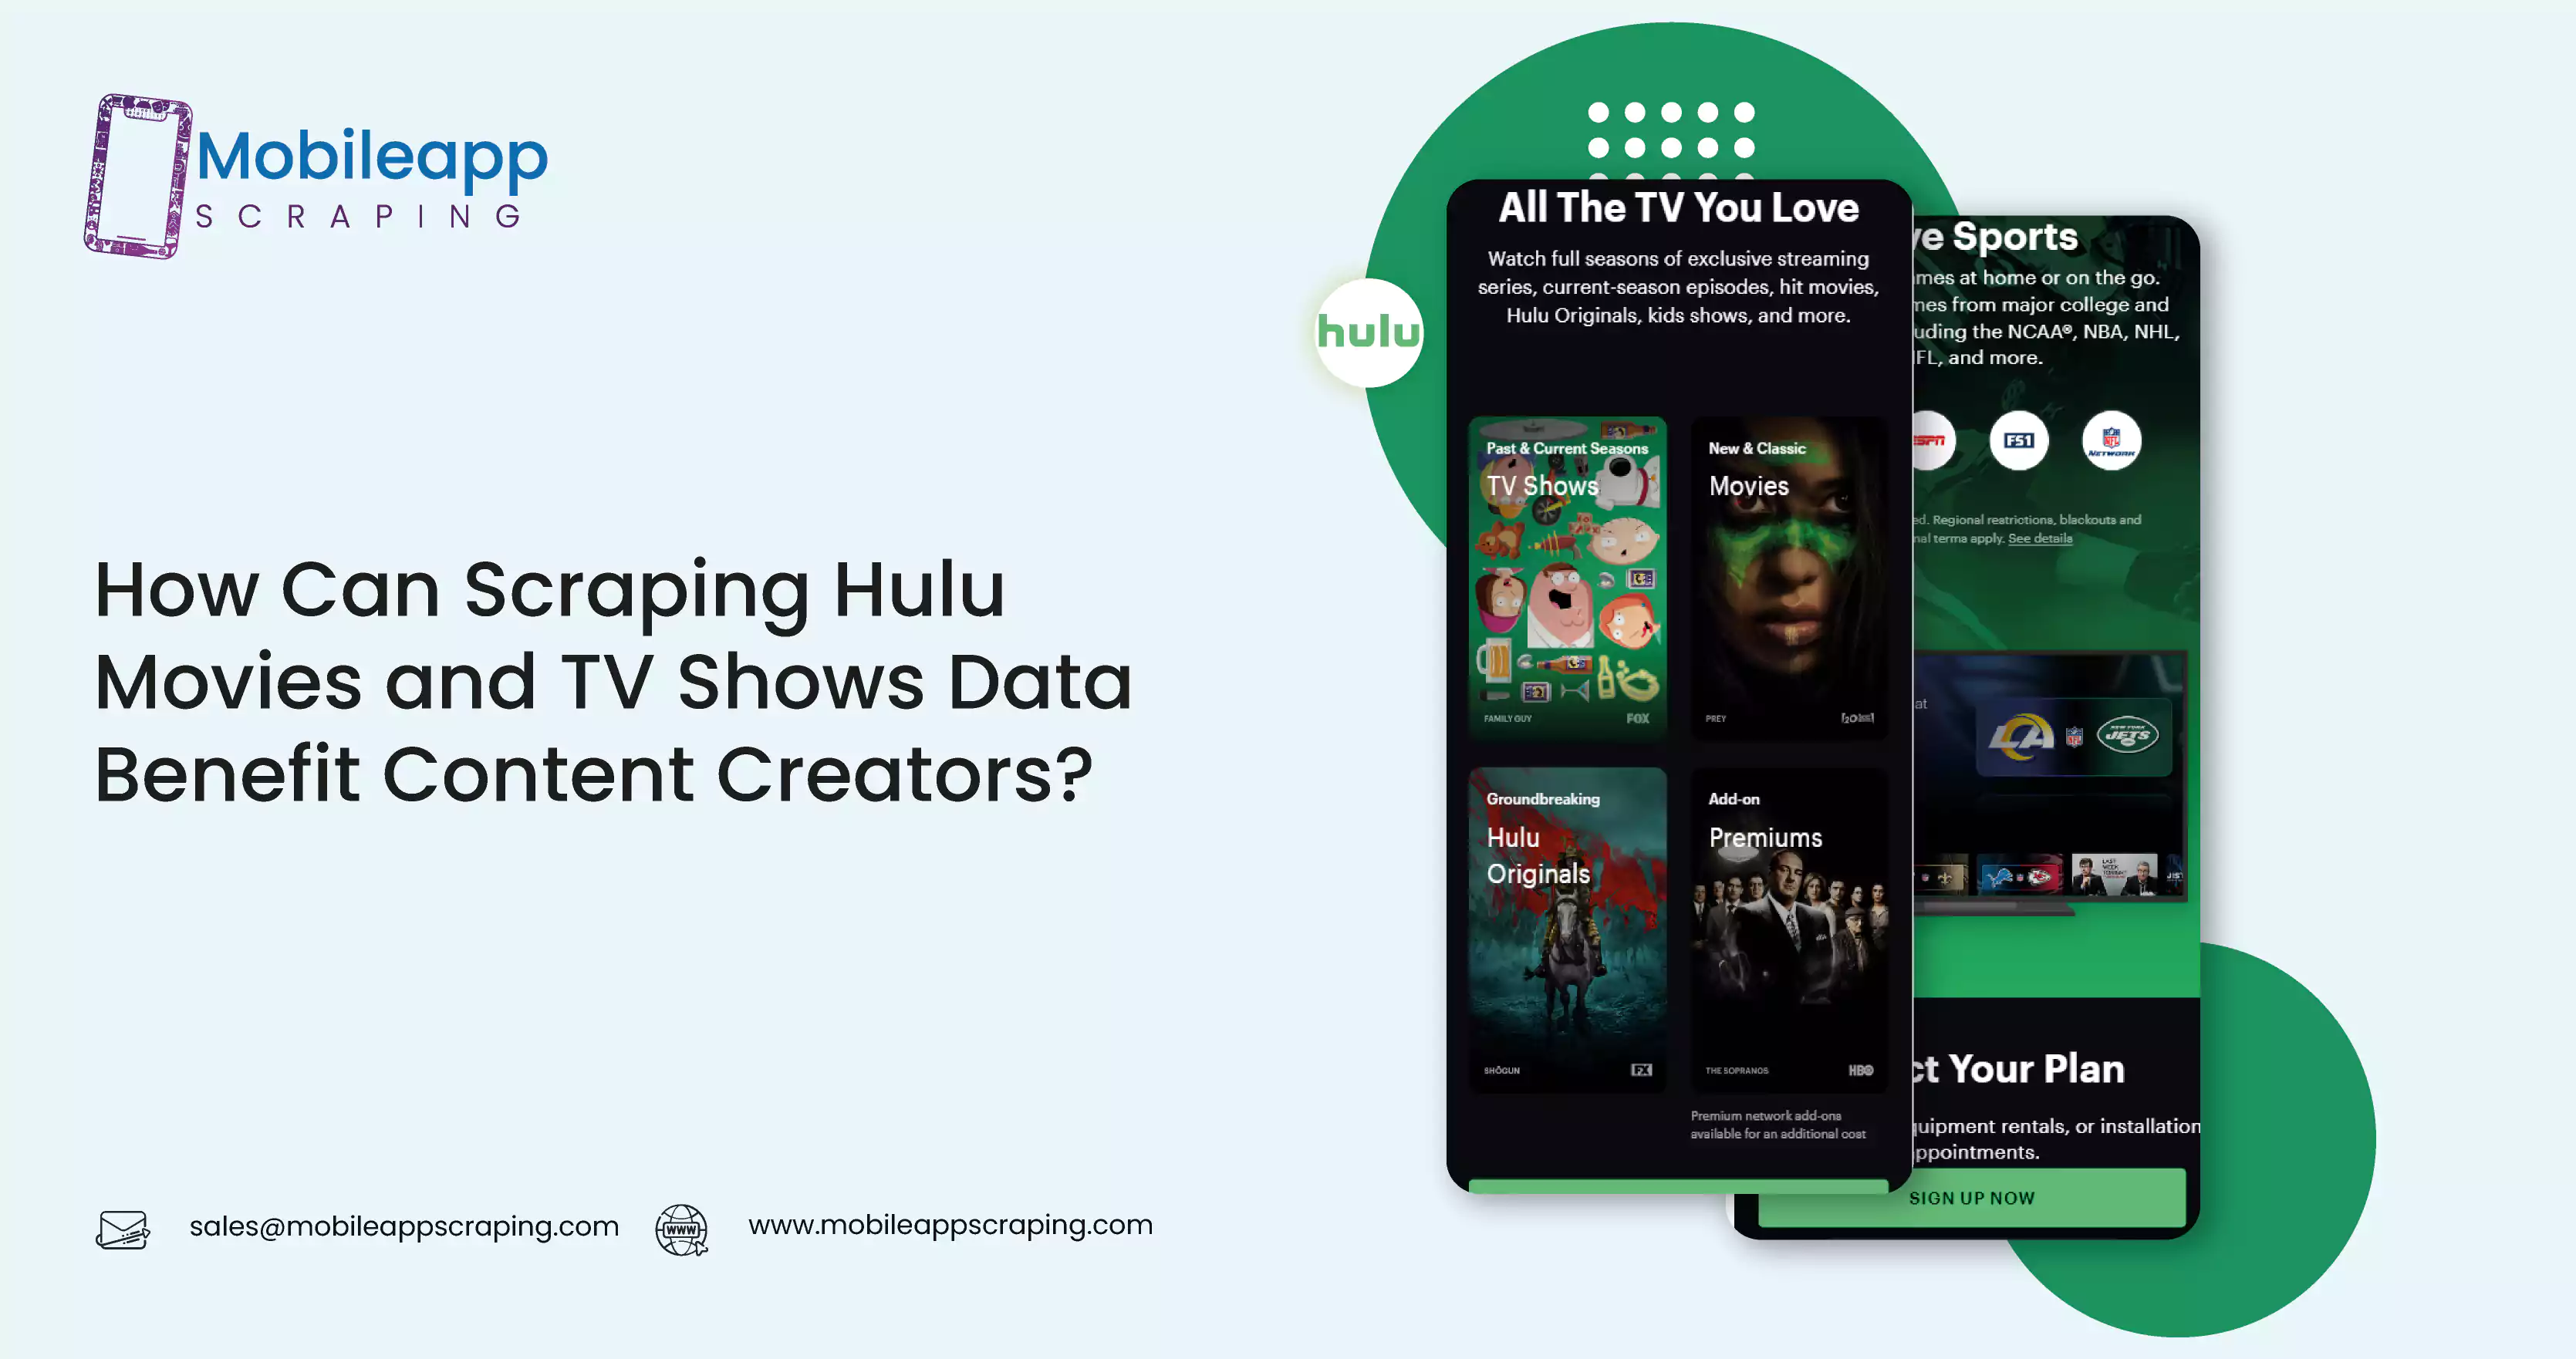 How Can Scraping Hulu Movies and TV Shows Data Benefit Content Creators